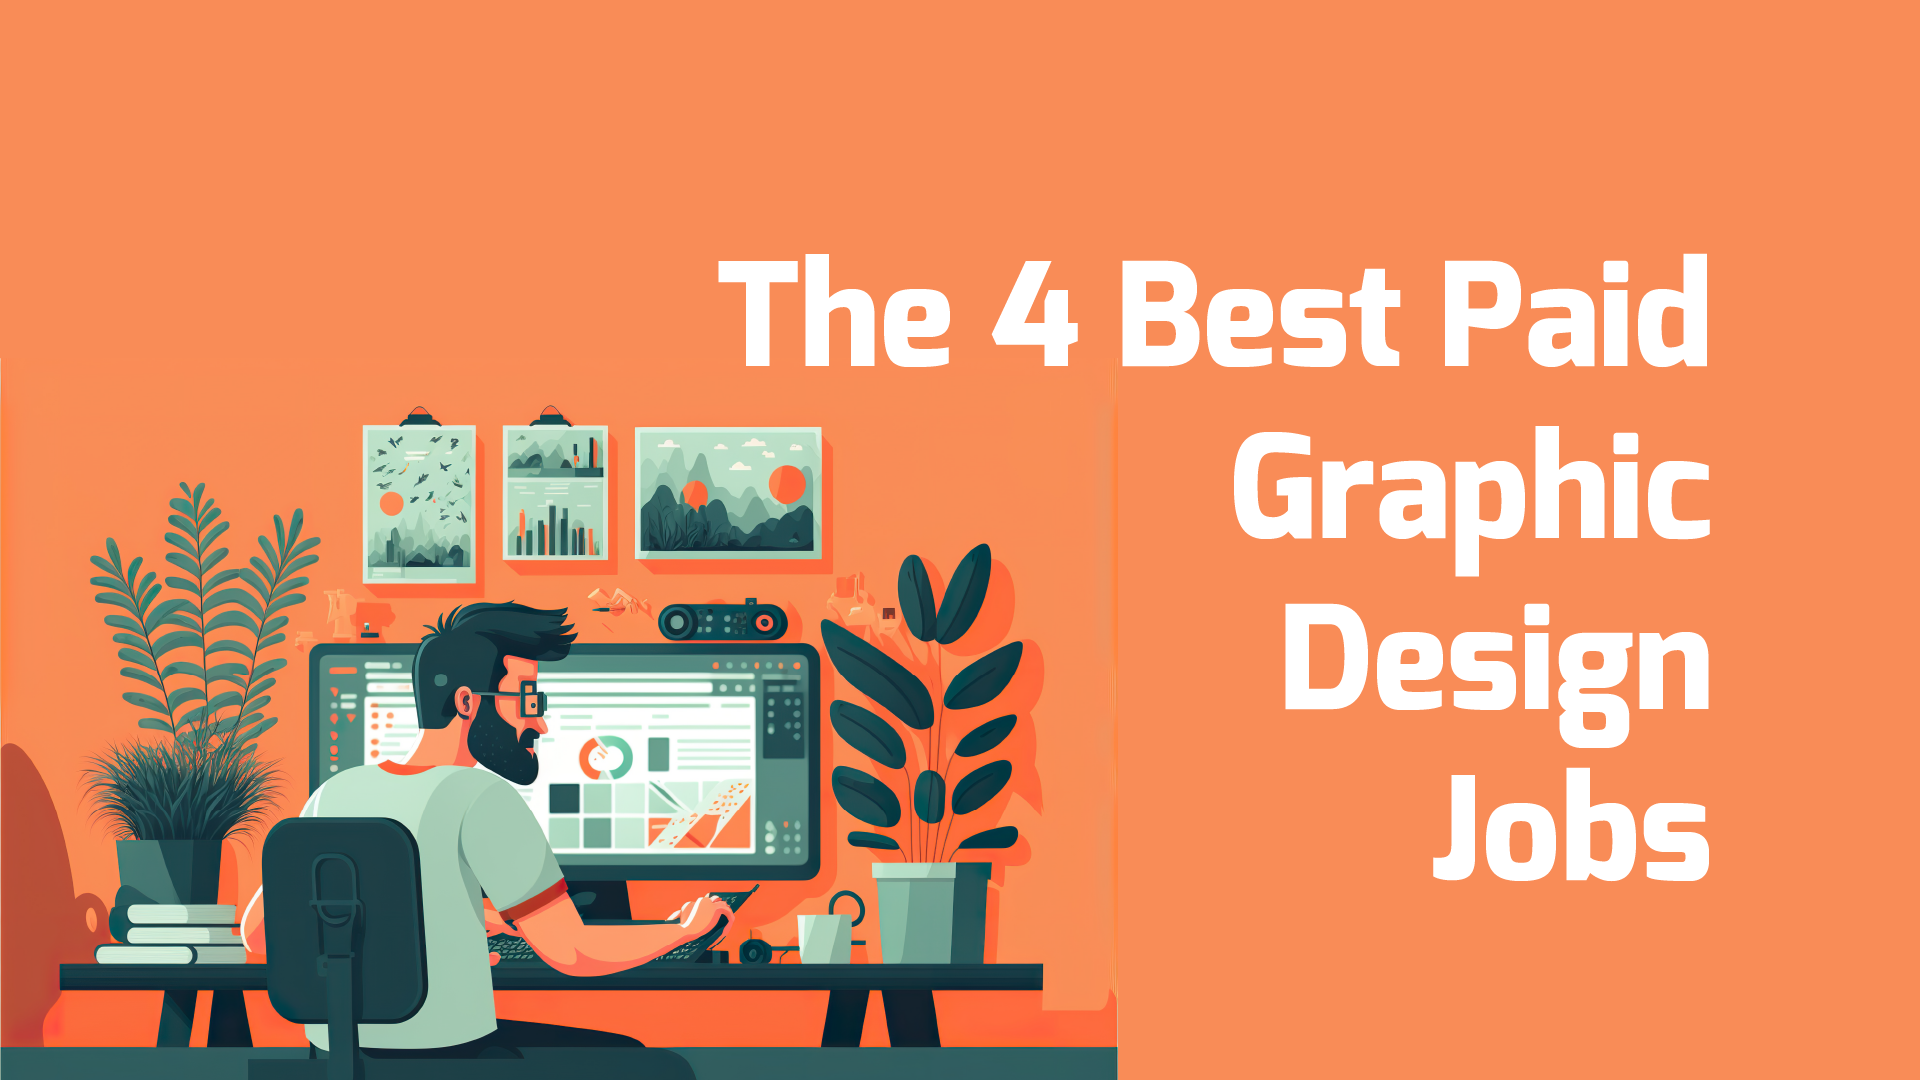 The 4 Best Paid Graphic Design Jobs